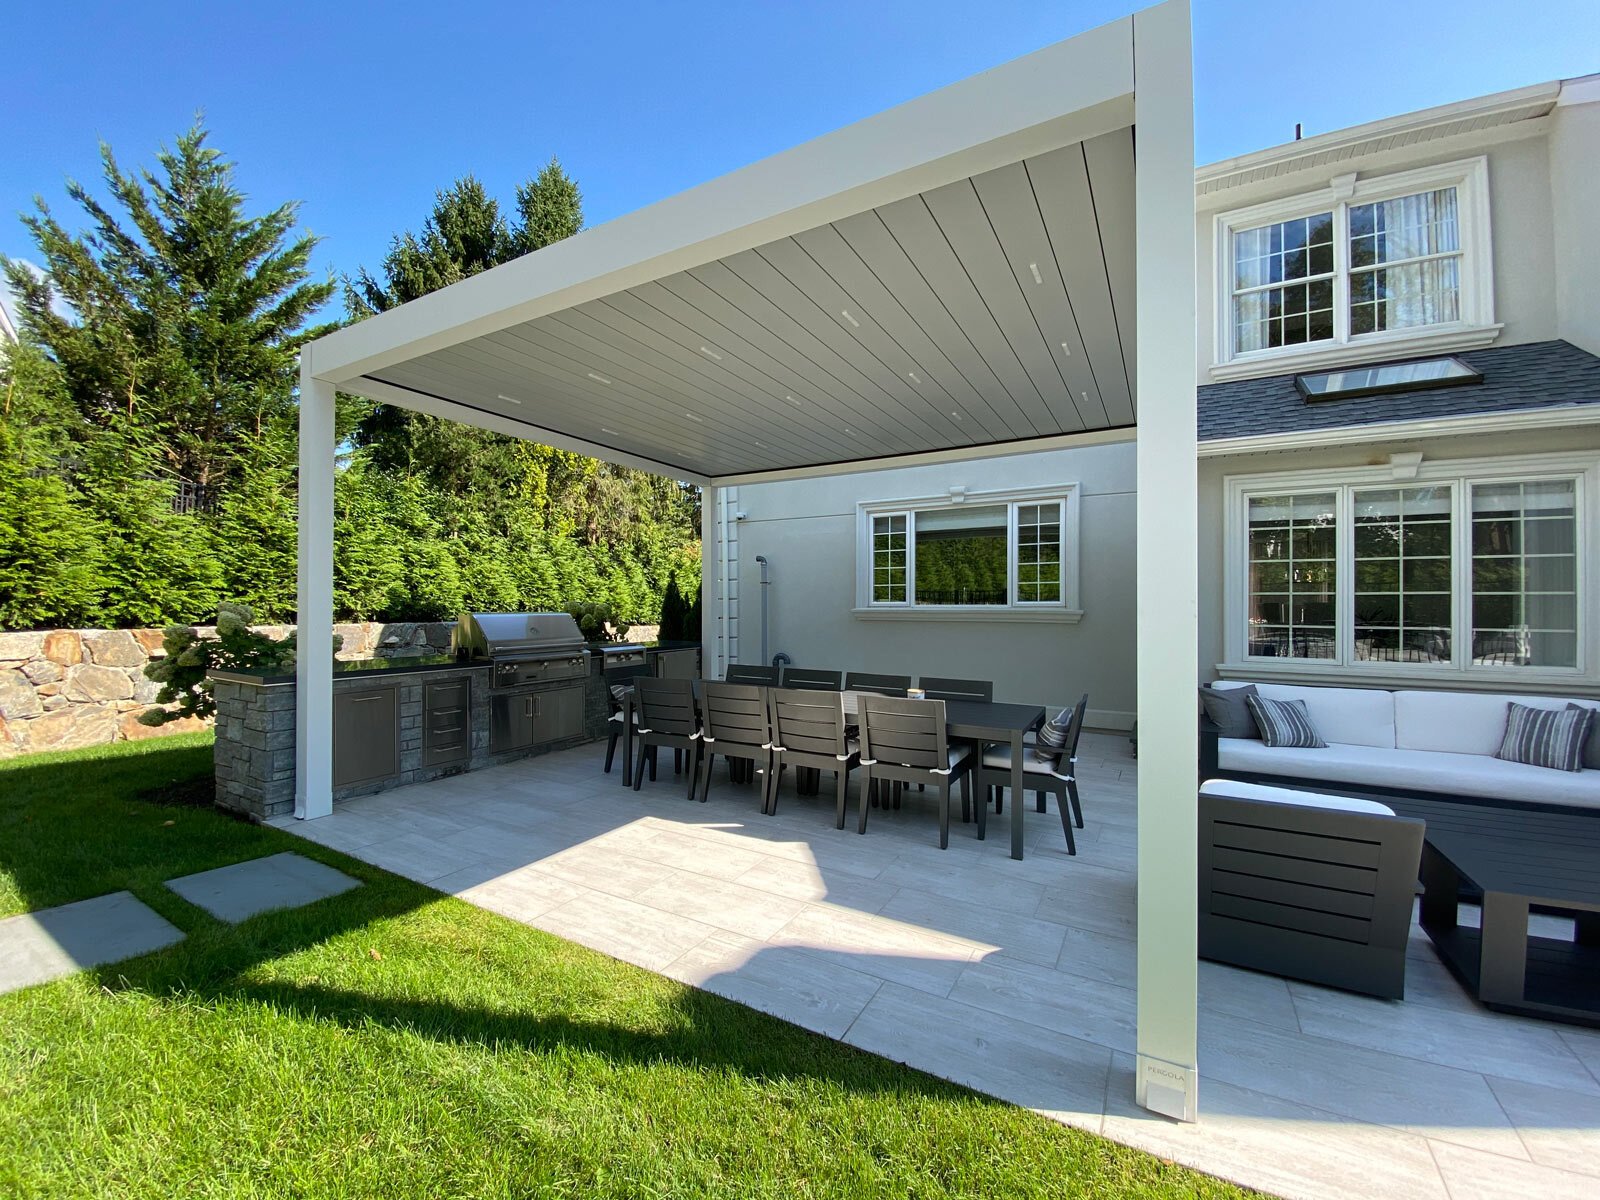 Featured image: A large white house with a louvered pergola in the backyard - Read full post: The Top Louvered Pergola Designs for 2023: Inspiration and Ideas